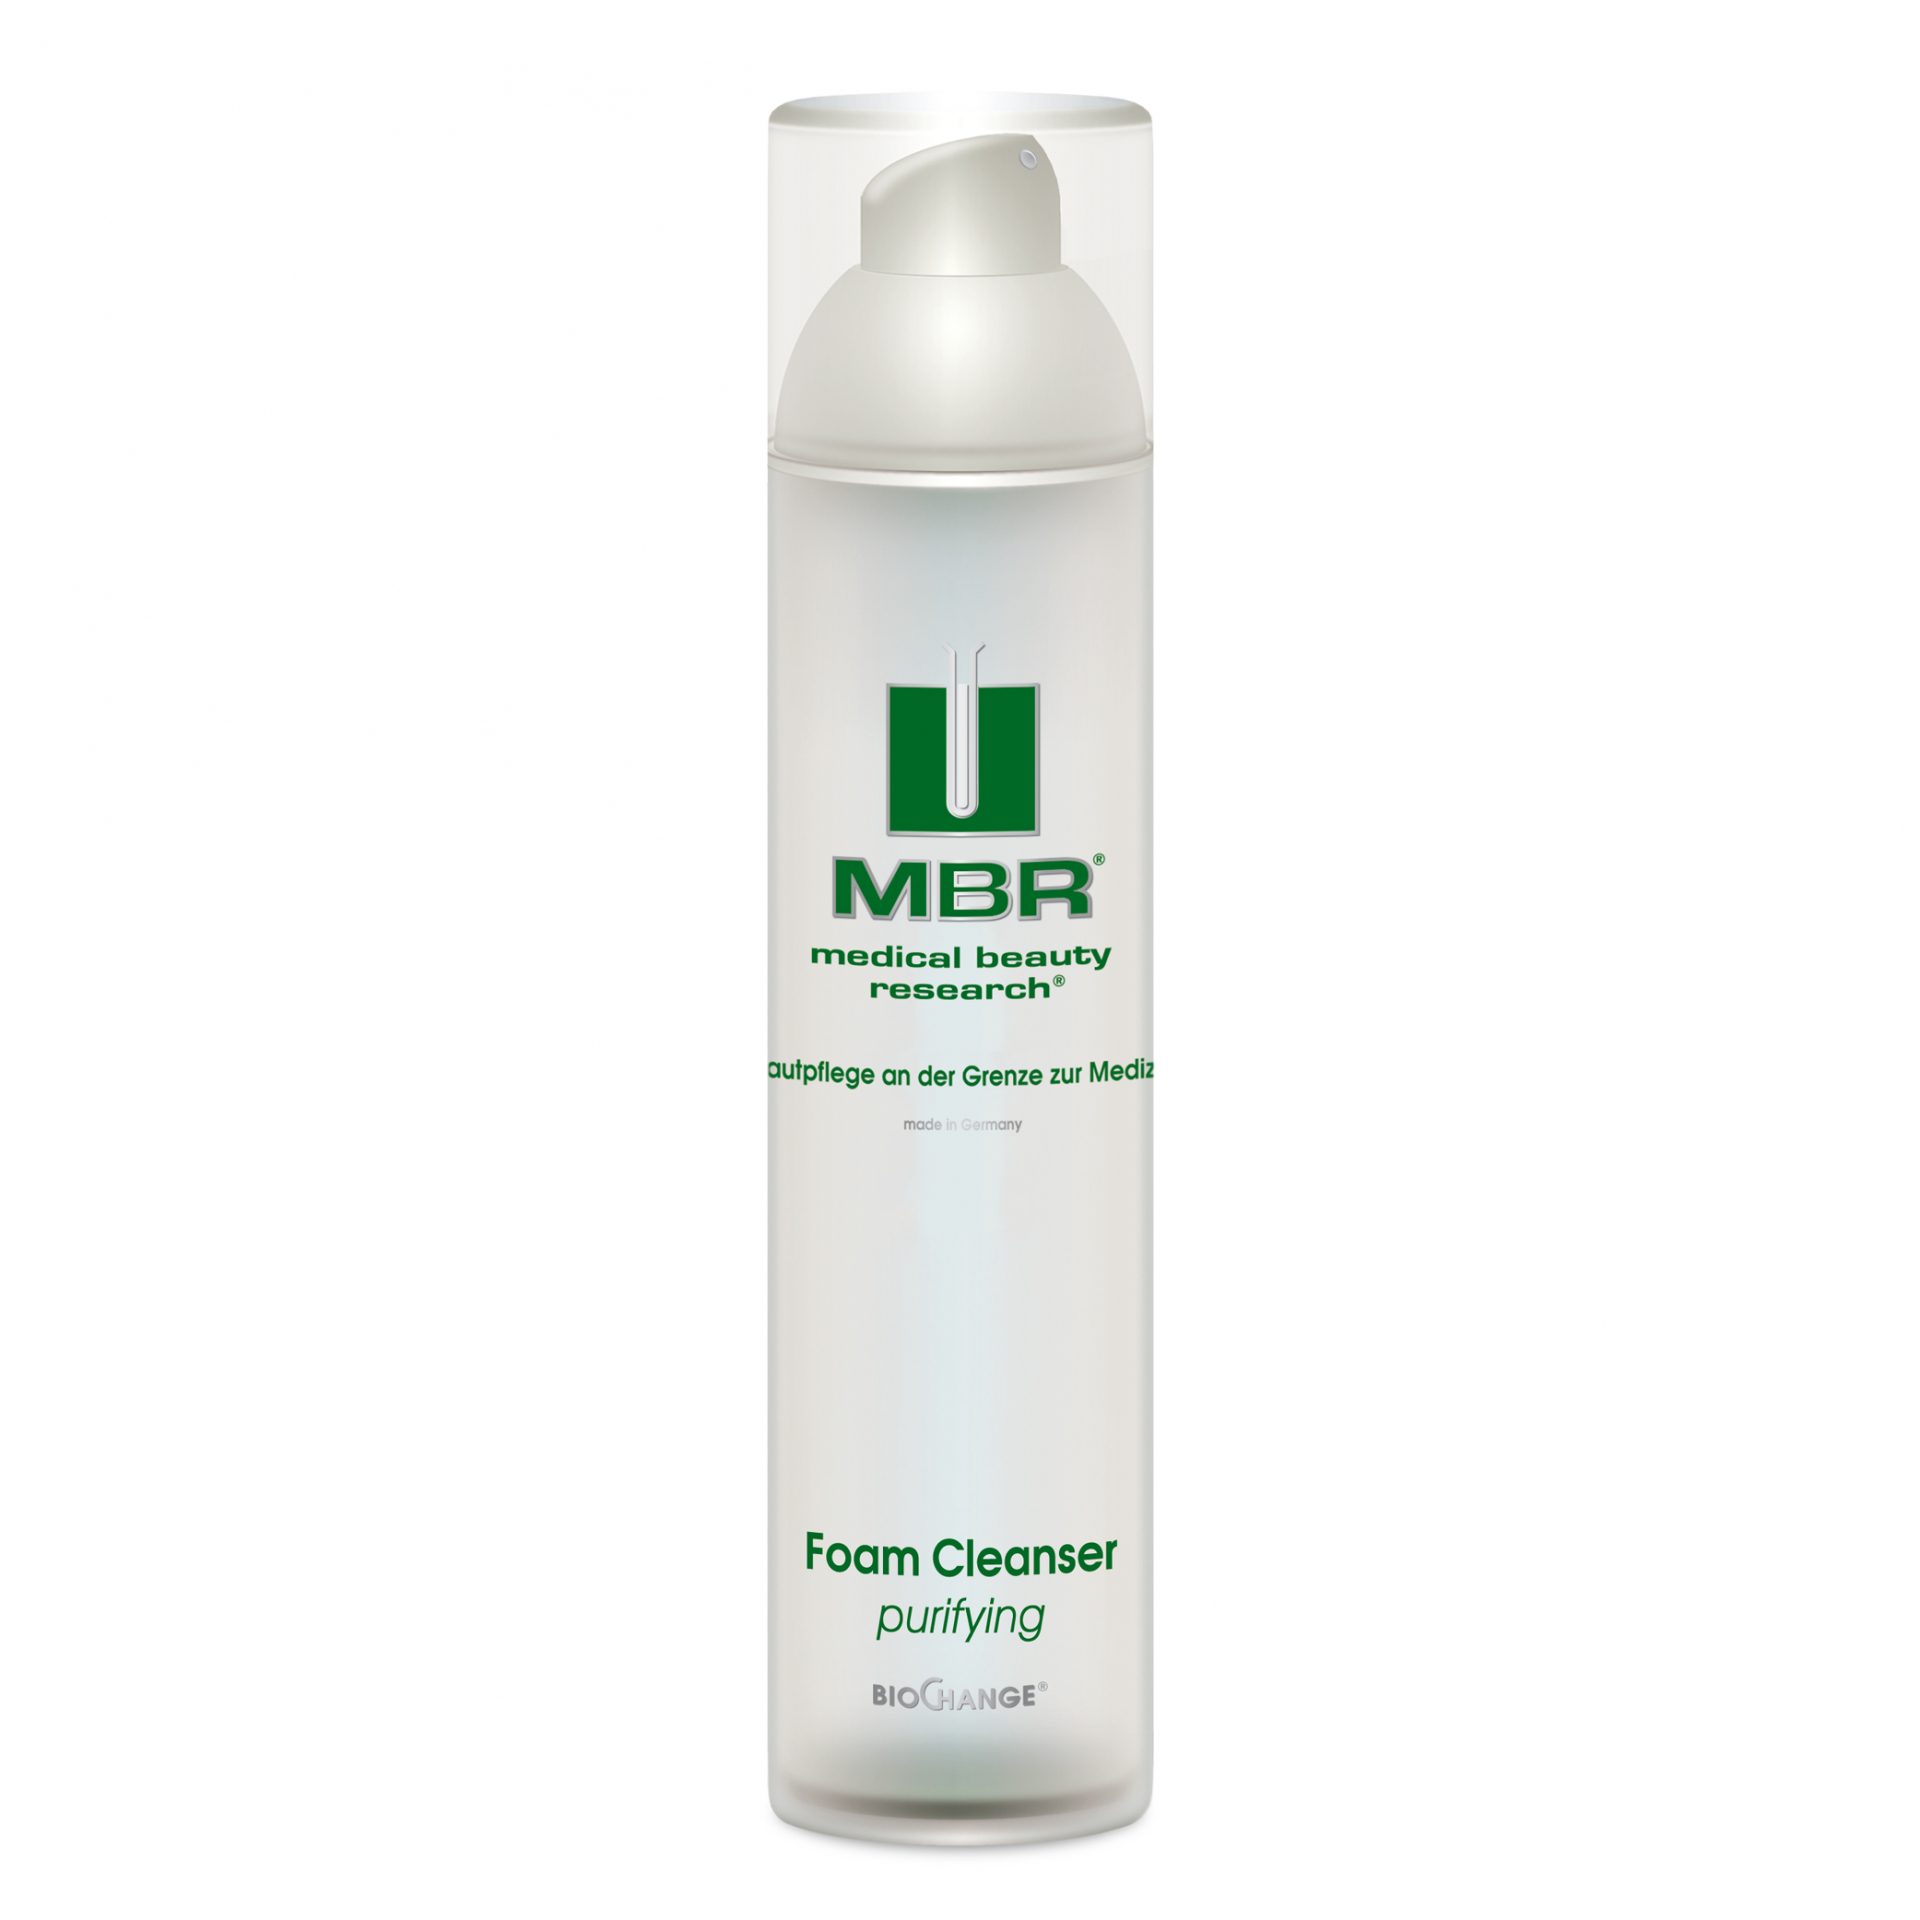 MBR Foam Cleanser purifying